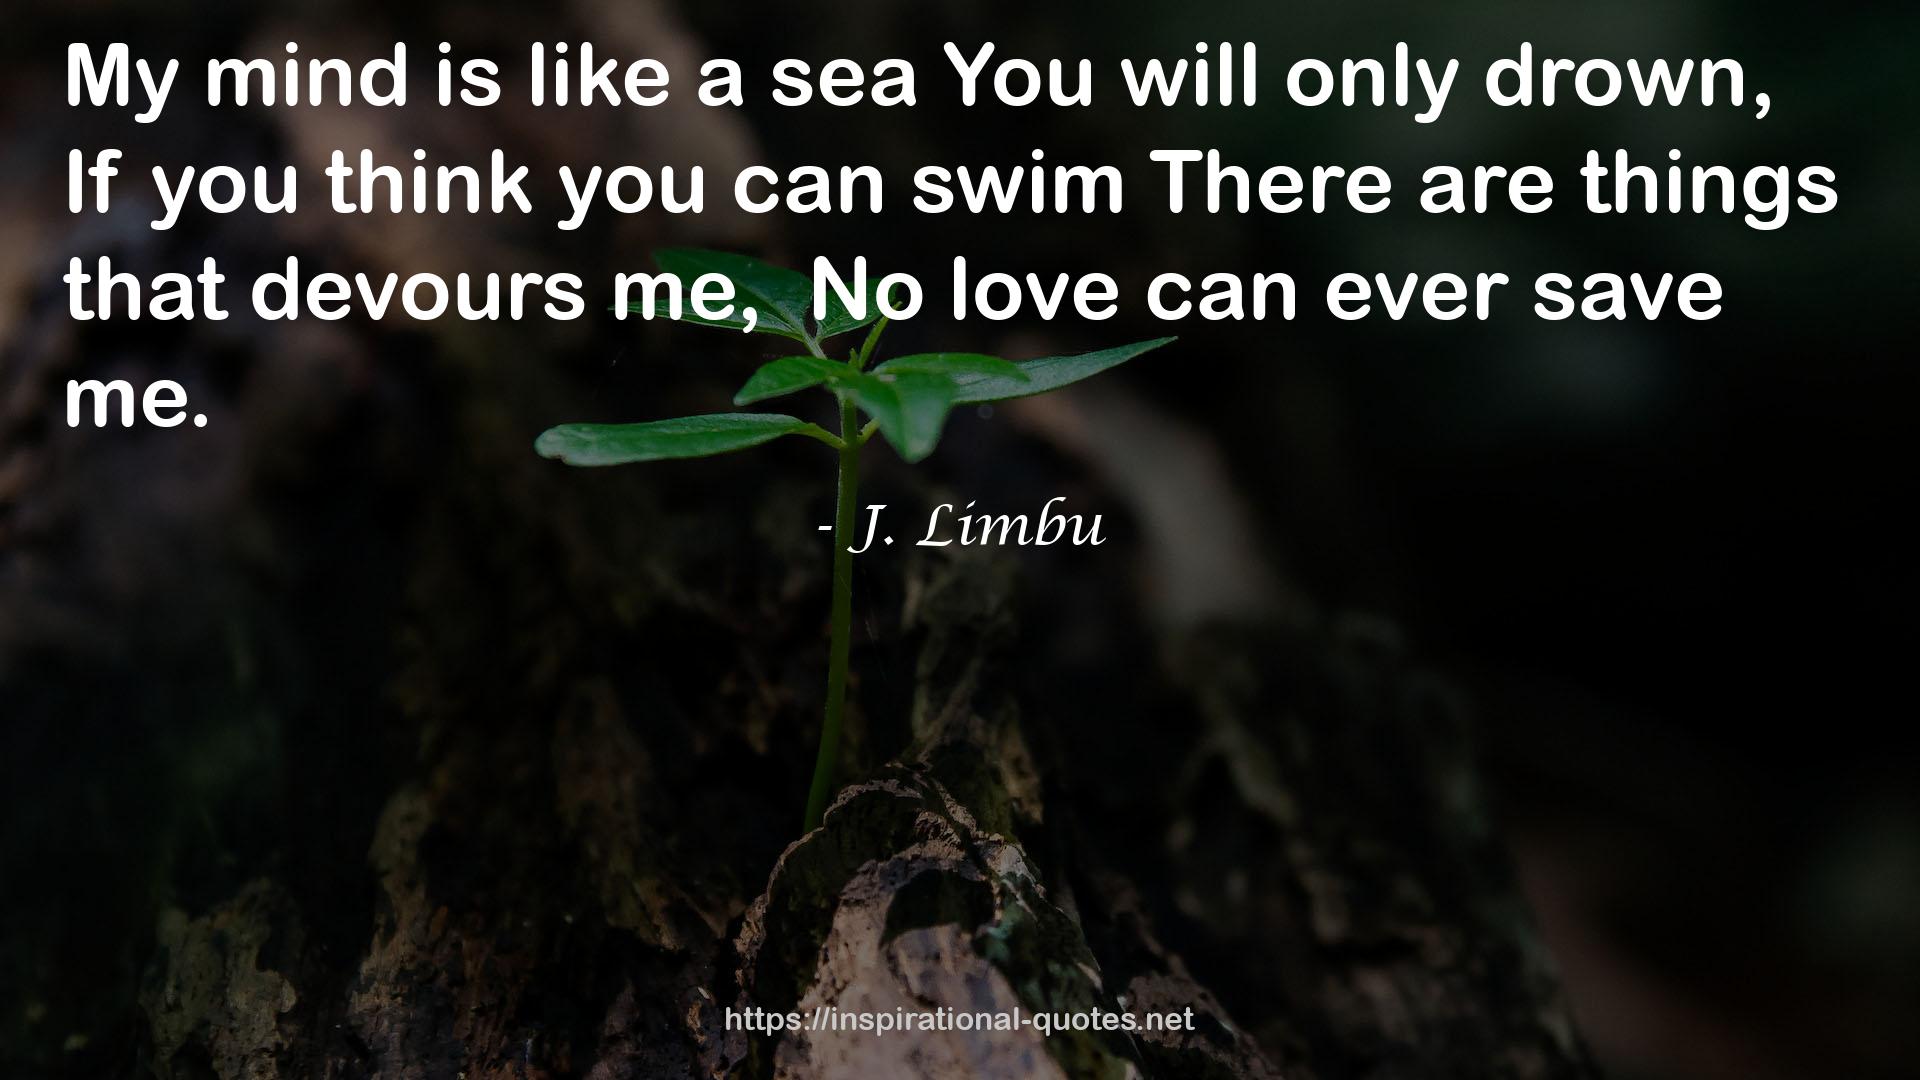 a seaYou  QUOTES